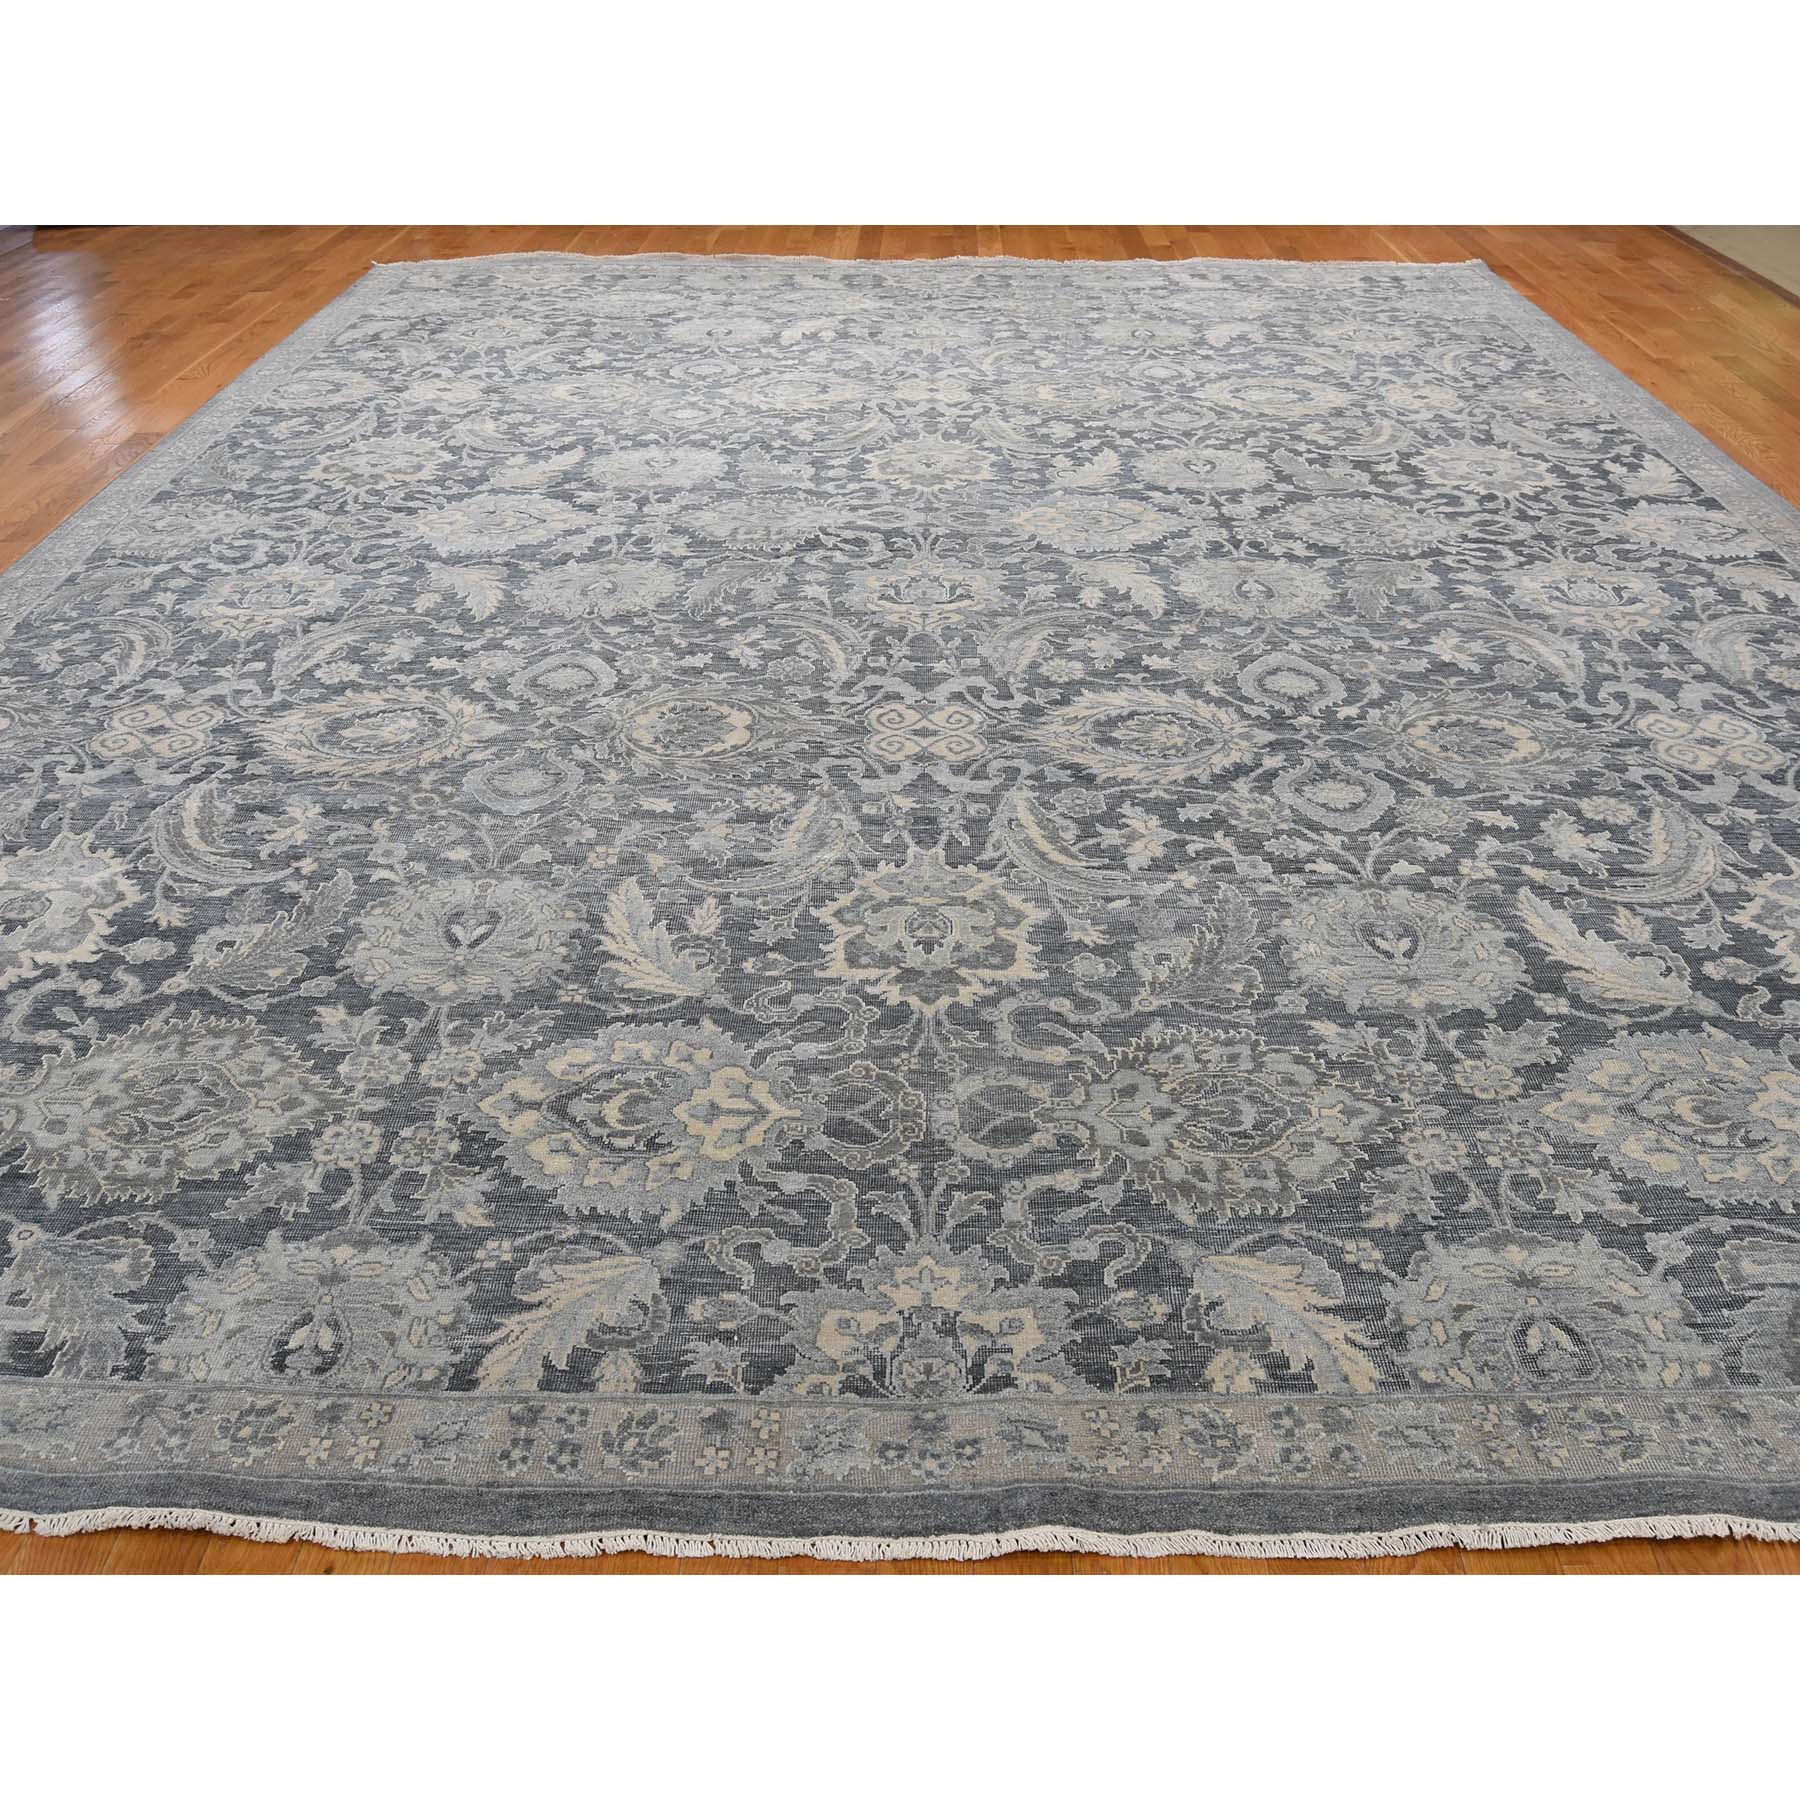 12'x15'10" Hand Woven Oushak Influence Silk with Textured Wool Oriental Rug 